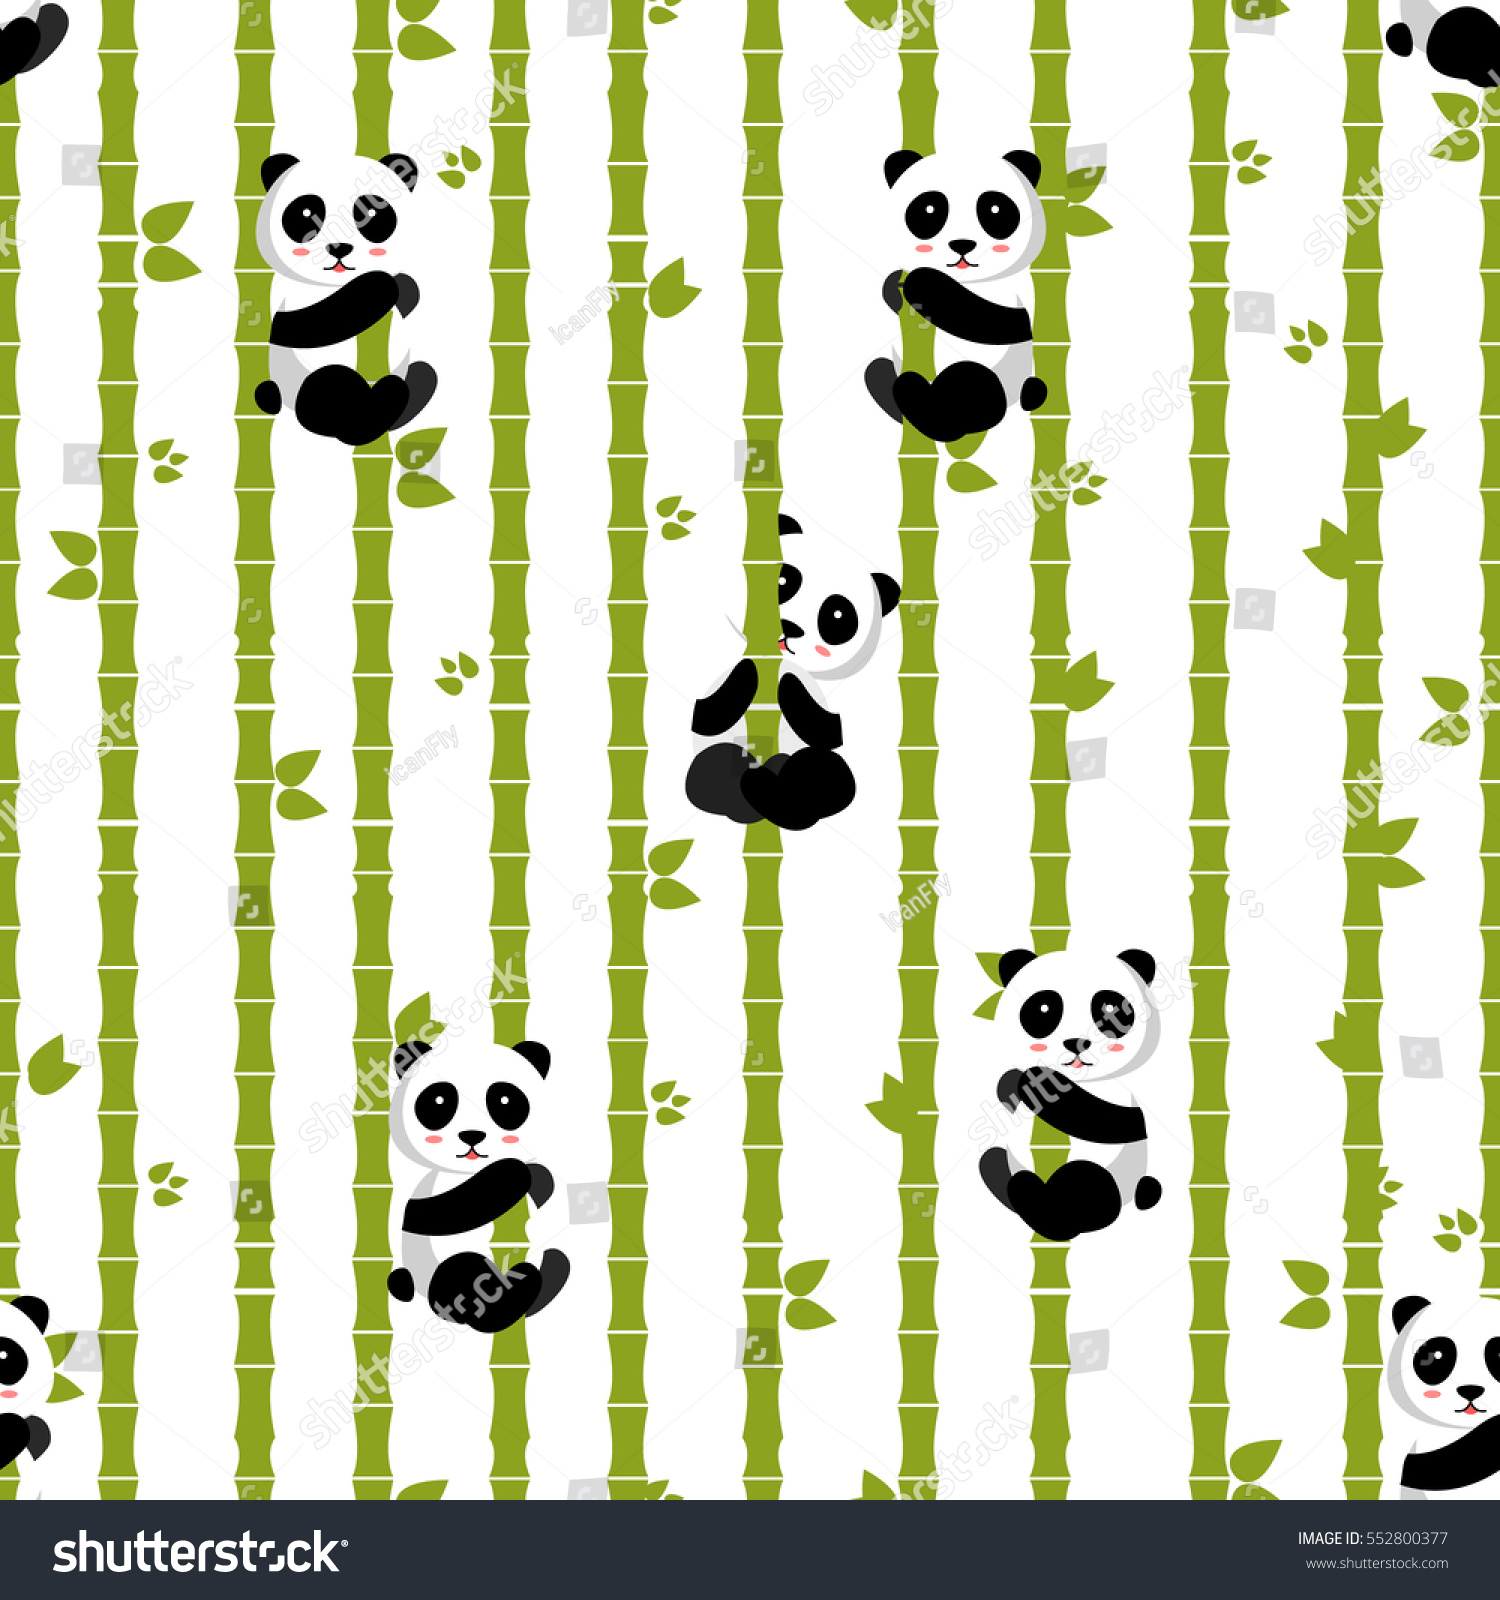 SVG of Panda with bamboo. Vector illustration, eps 10. Seamless pattern, easy to edit and print. Panda baby. Bamboo leaves with pandas. svg